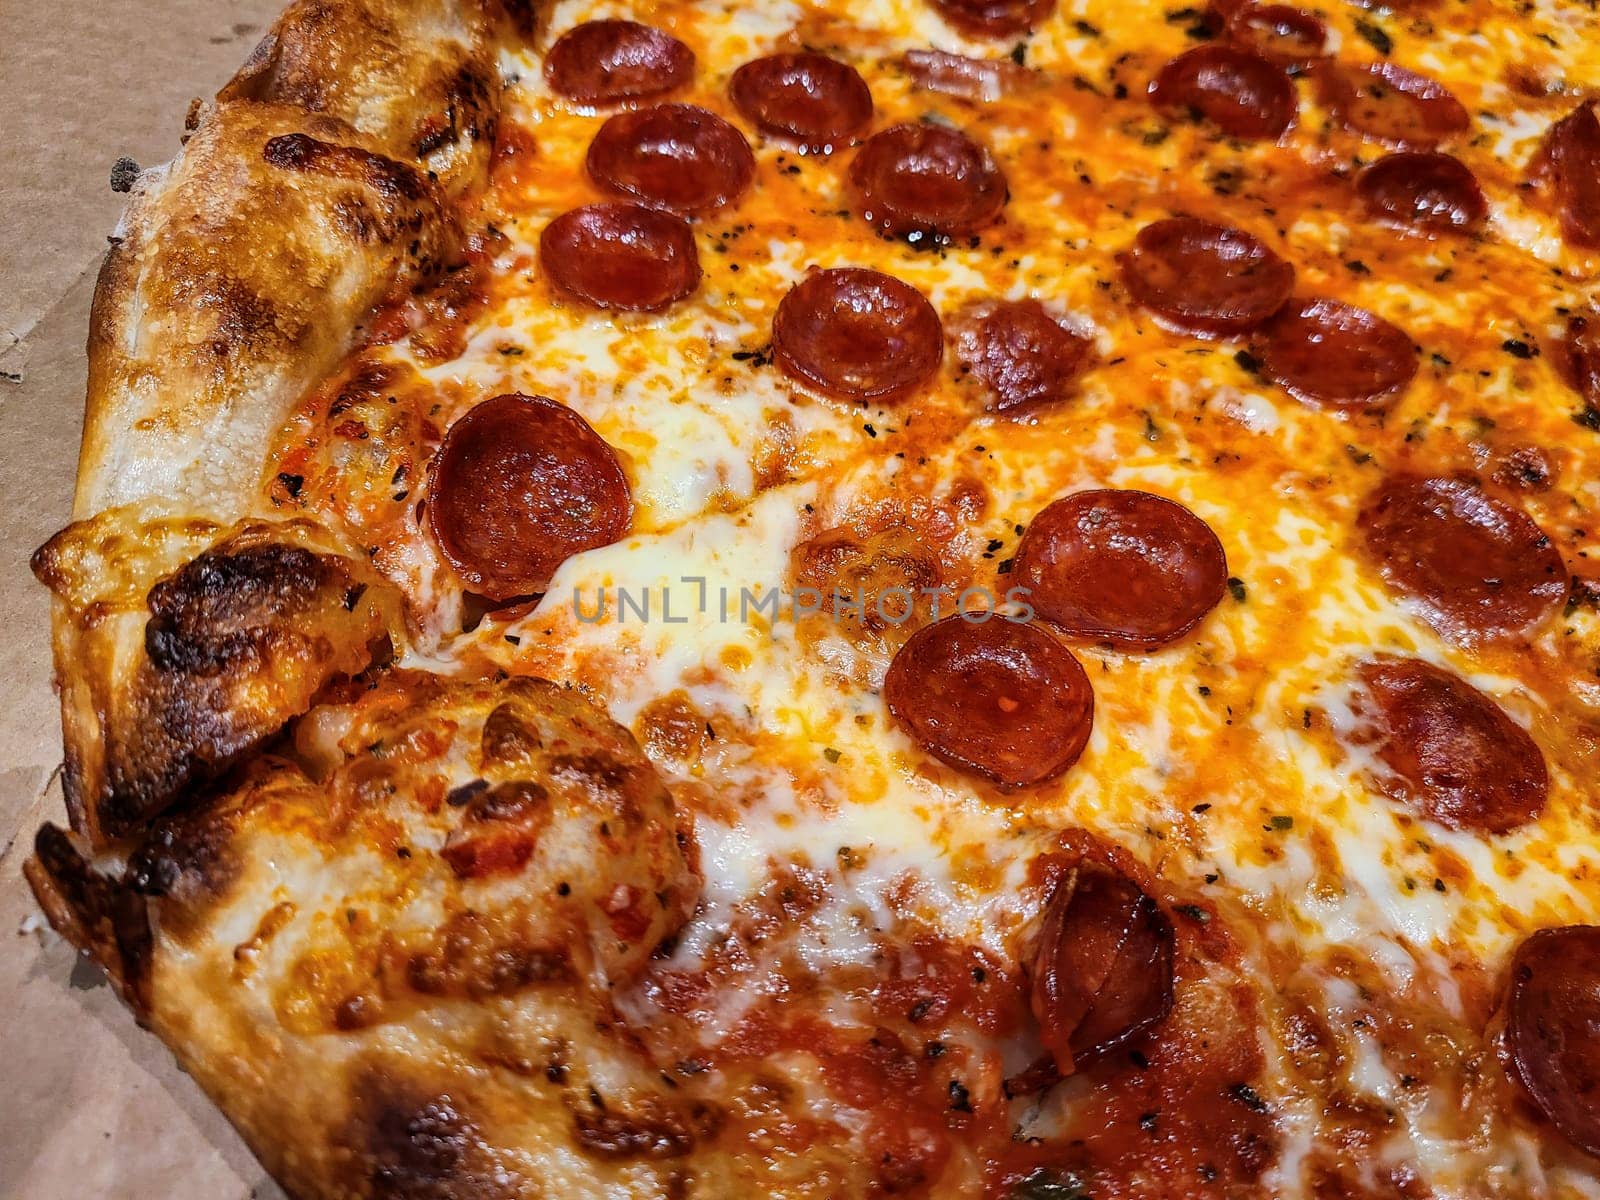 Close-up of a sizzling pepperoni pizza with crispy edges and bubbly cheese, perfect for a Fort Wayne feast.